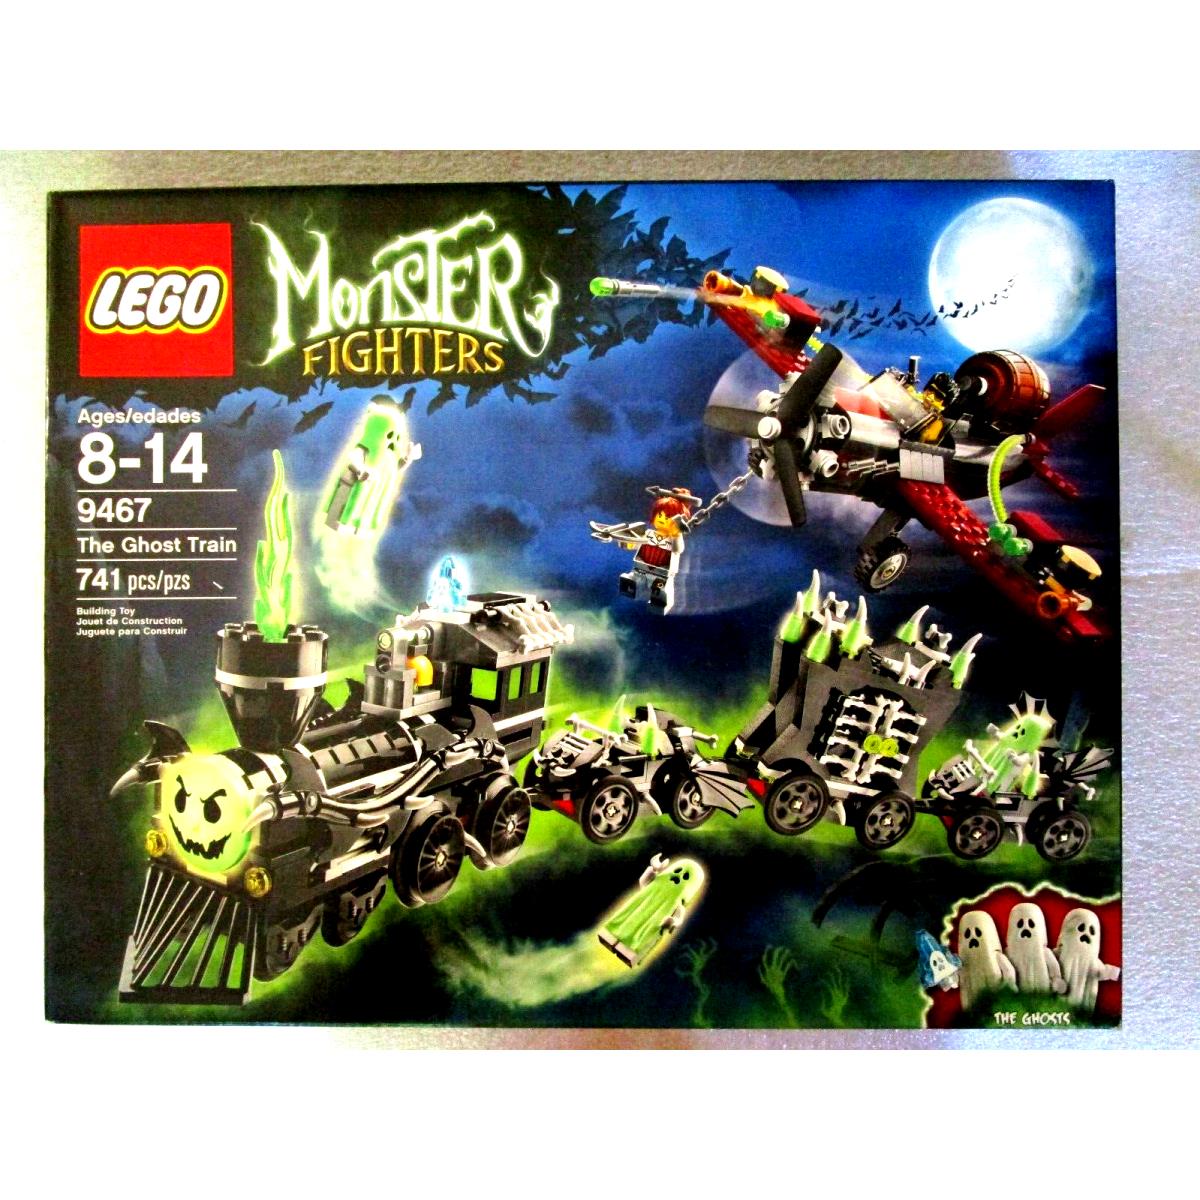 Lego 9467 Monster Fighters The Ghost Train Retired 2013